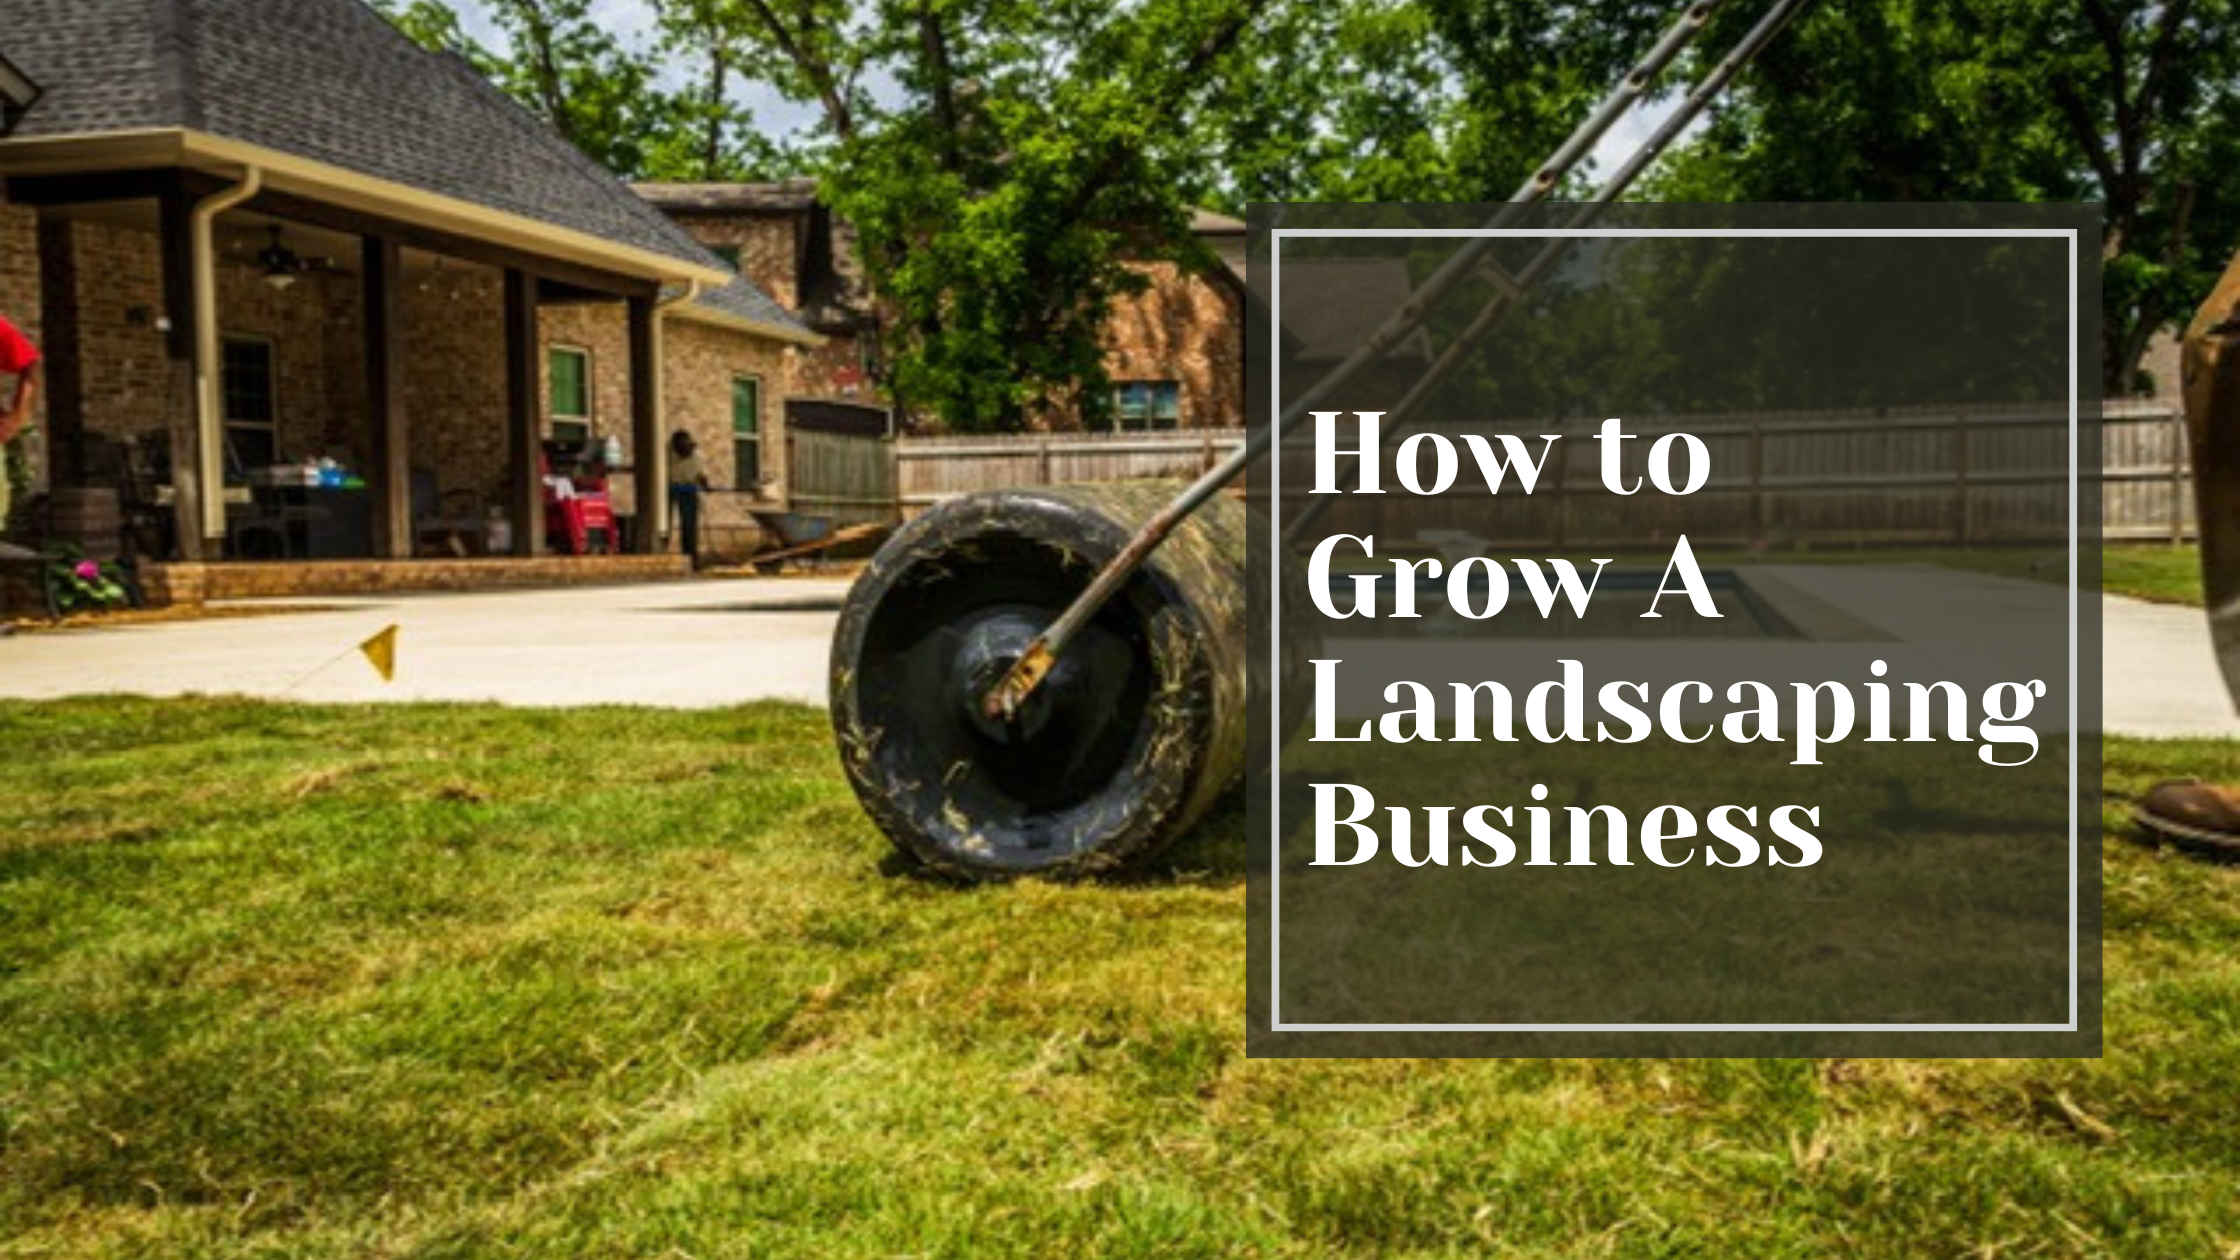 How to Grow a Landscaping Business: 12 Steps to a Million Dollars